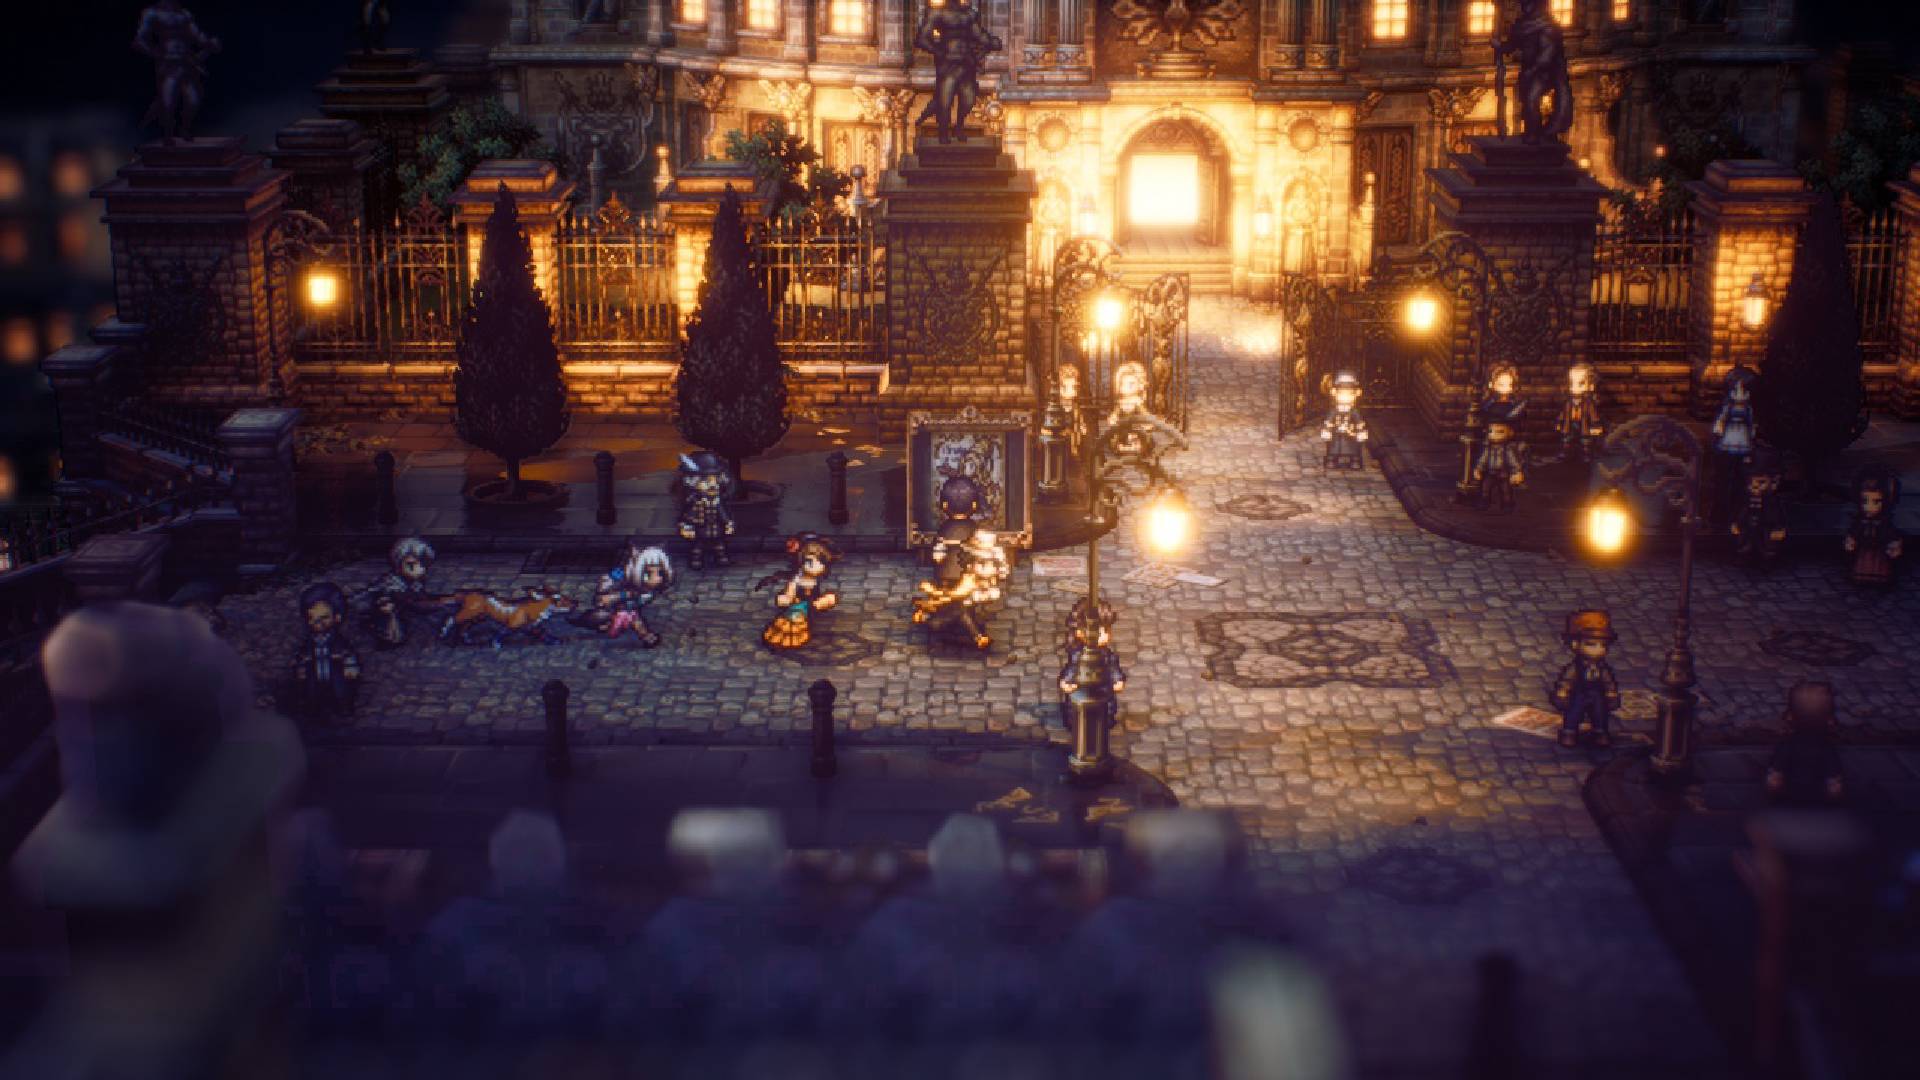 Octopath Traveler 2 - A Mysterious Box Quest Explained